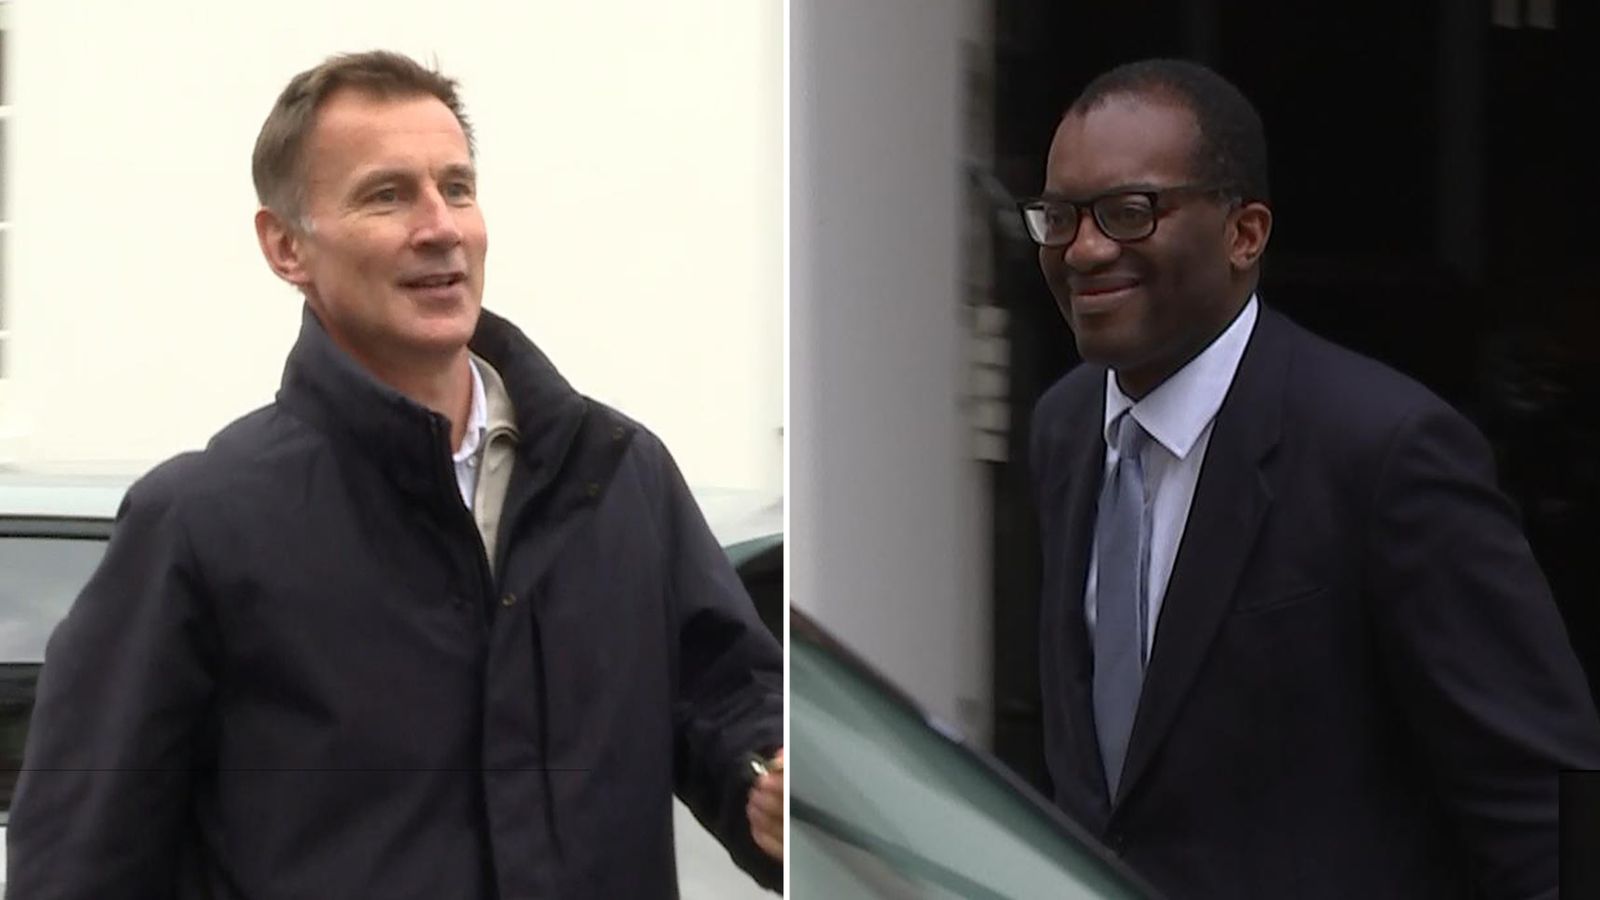 PM appoints Jeremy Hunt as chancellor after sacking Kwasi Kwarteng